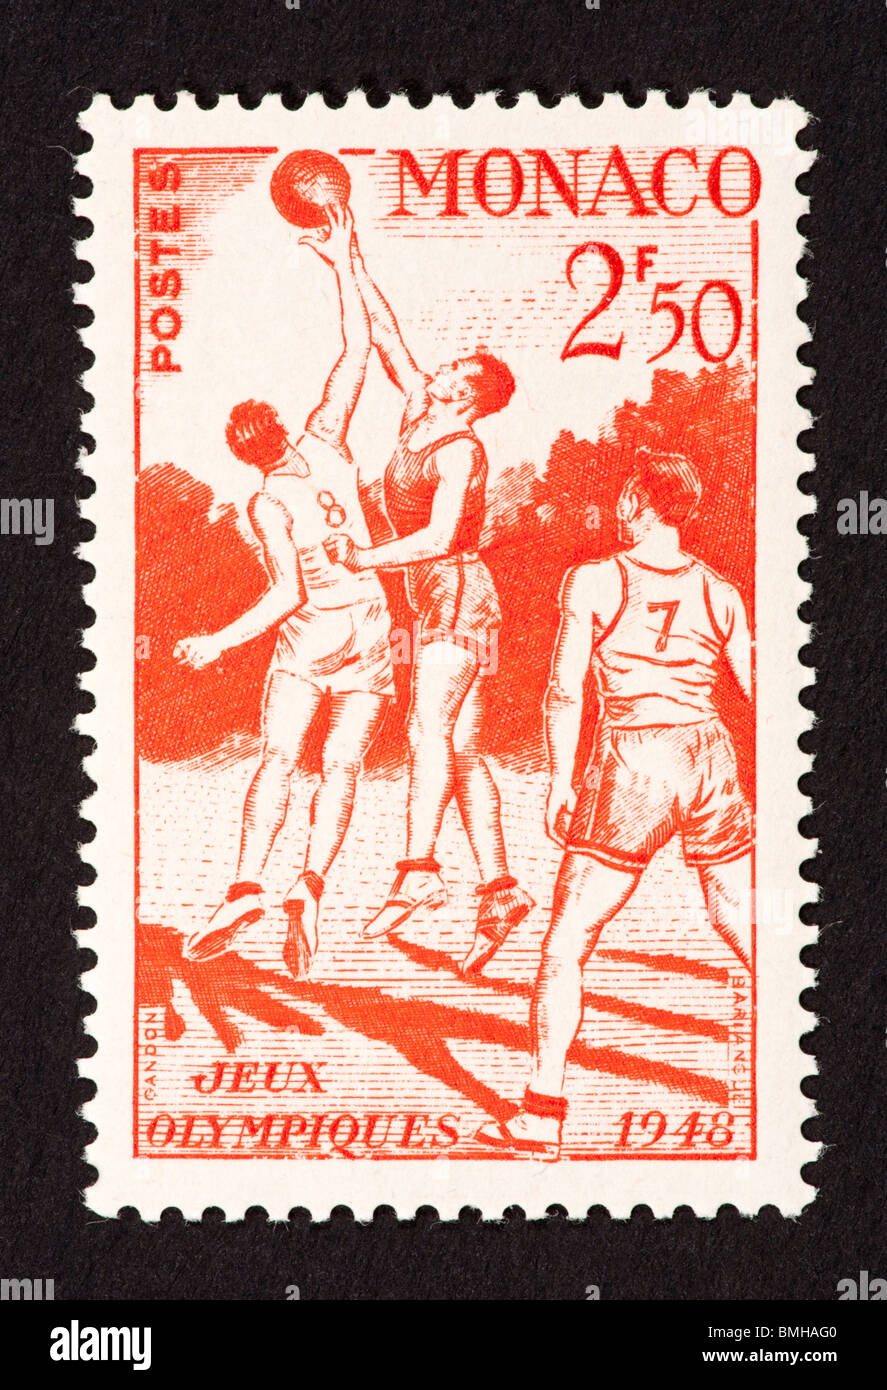 Postage stamp from Monaco depicting basketball players, for the 1948 Olympic games. Stock Photo